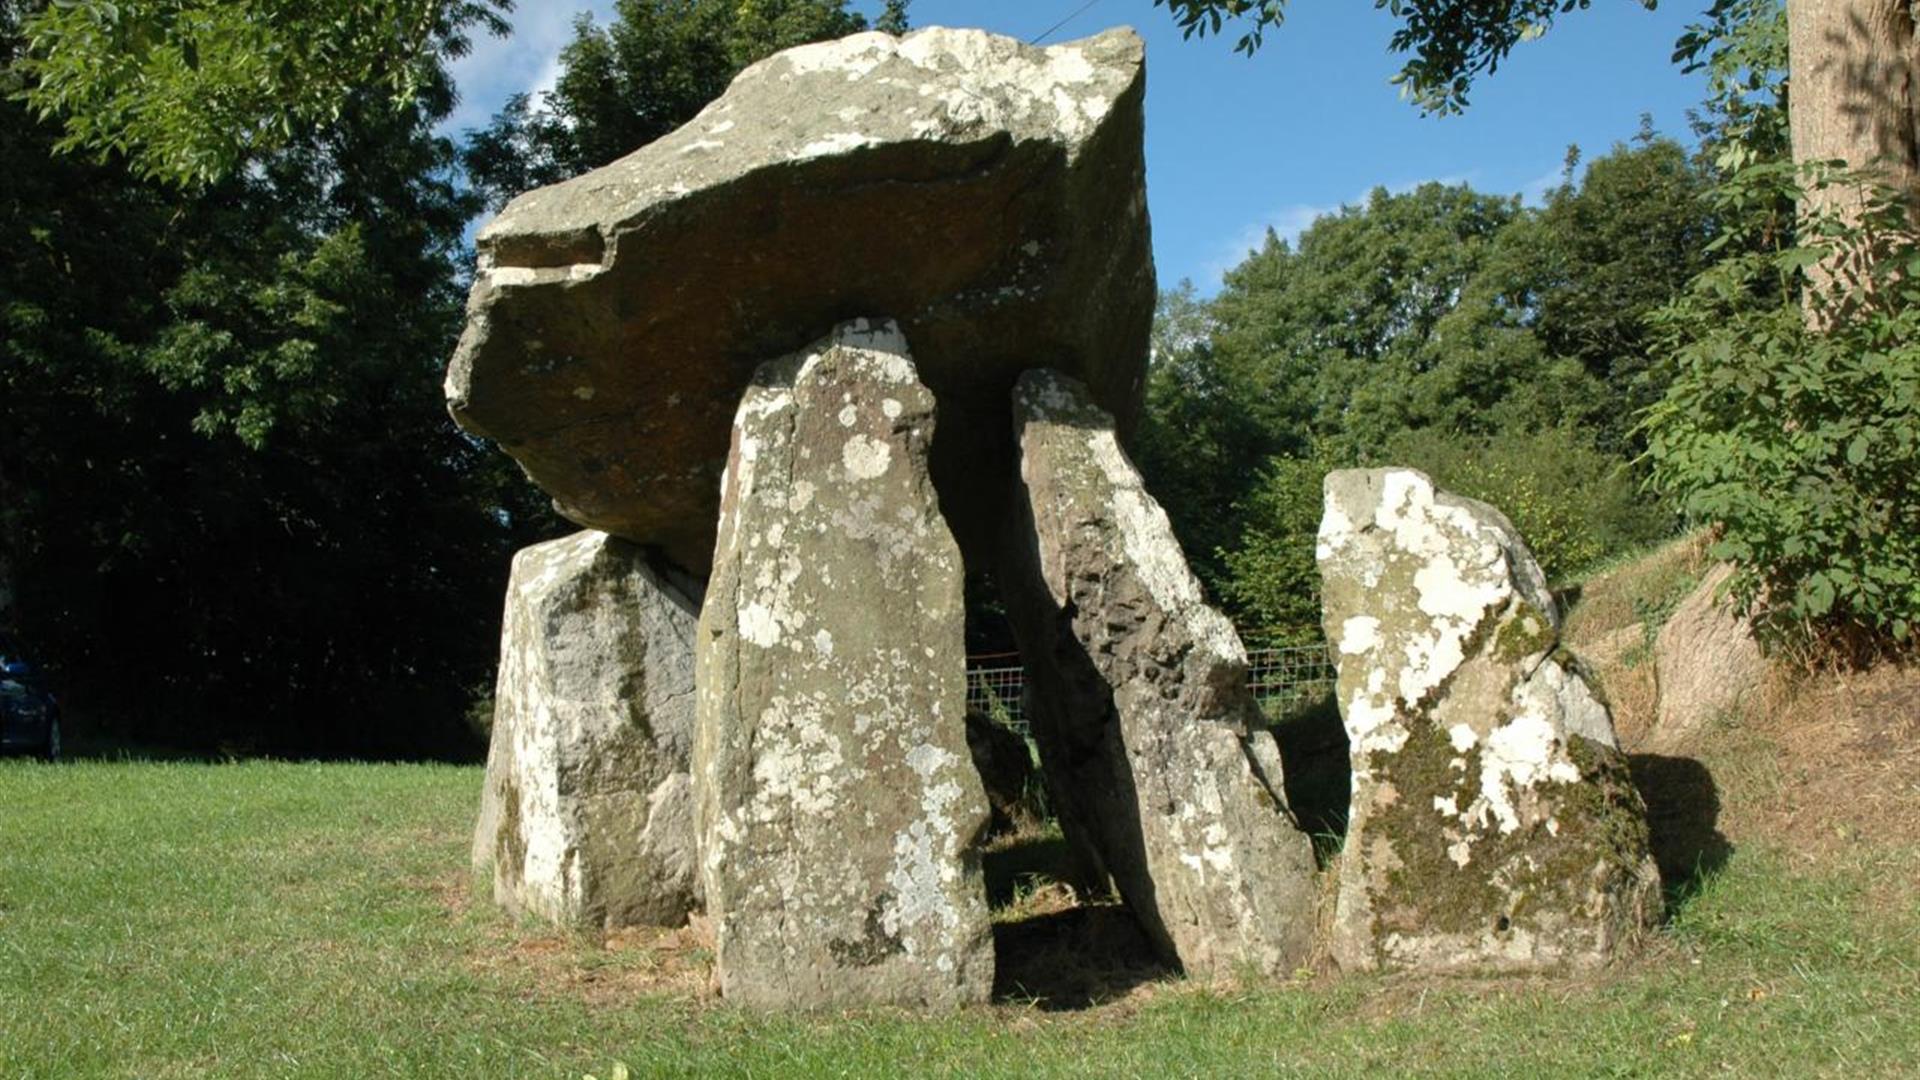 Standing stones at a Dolmen